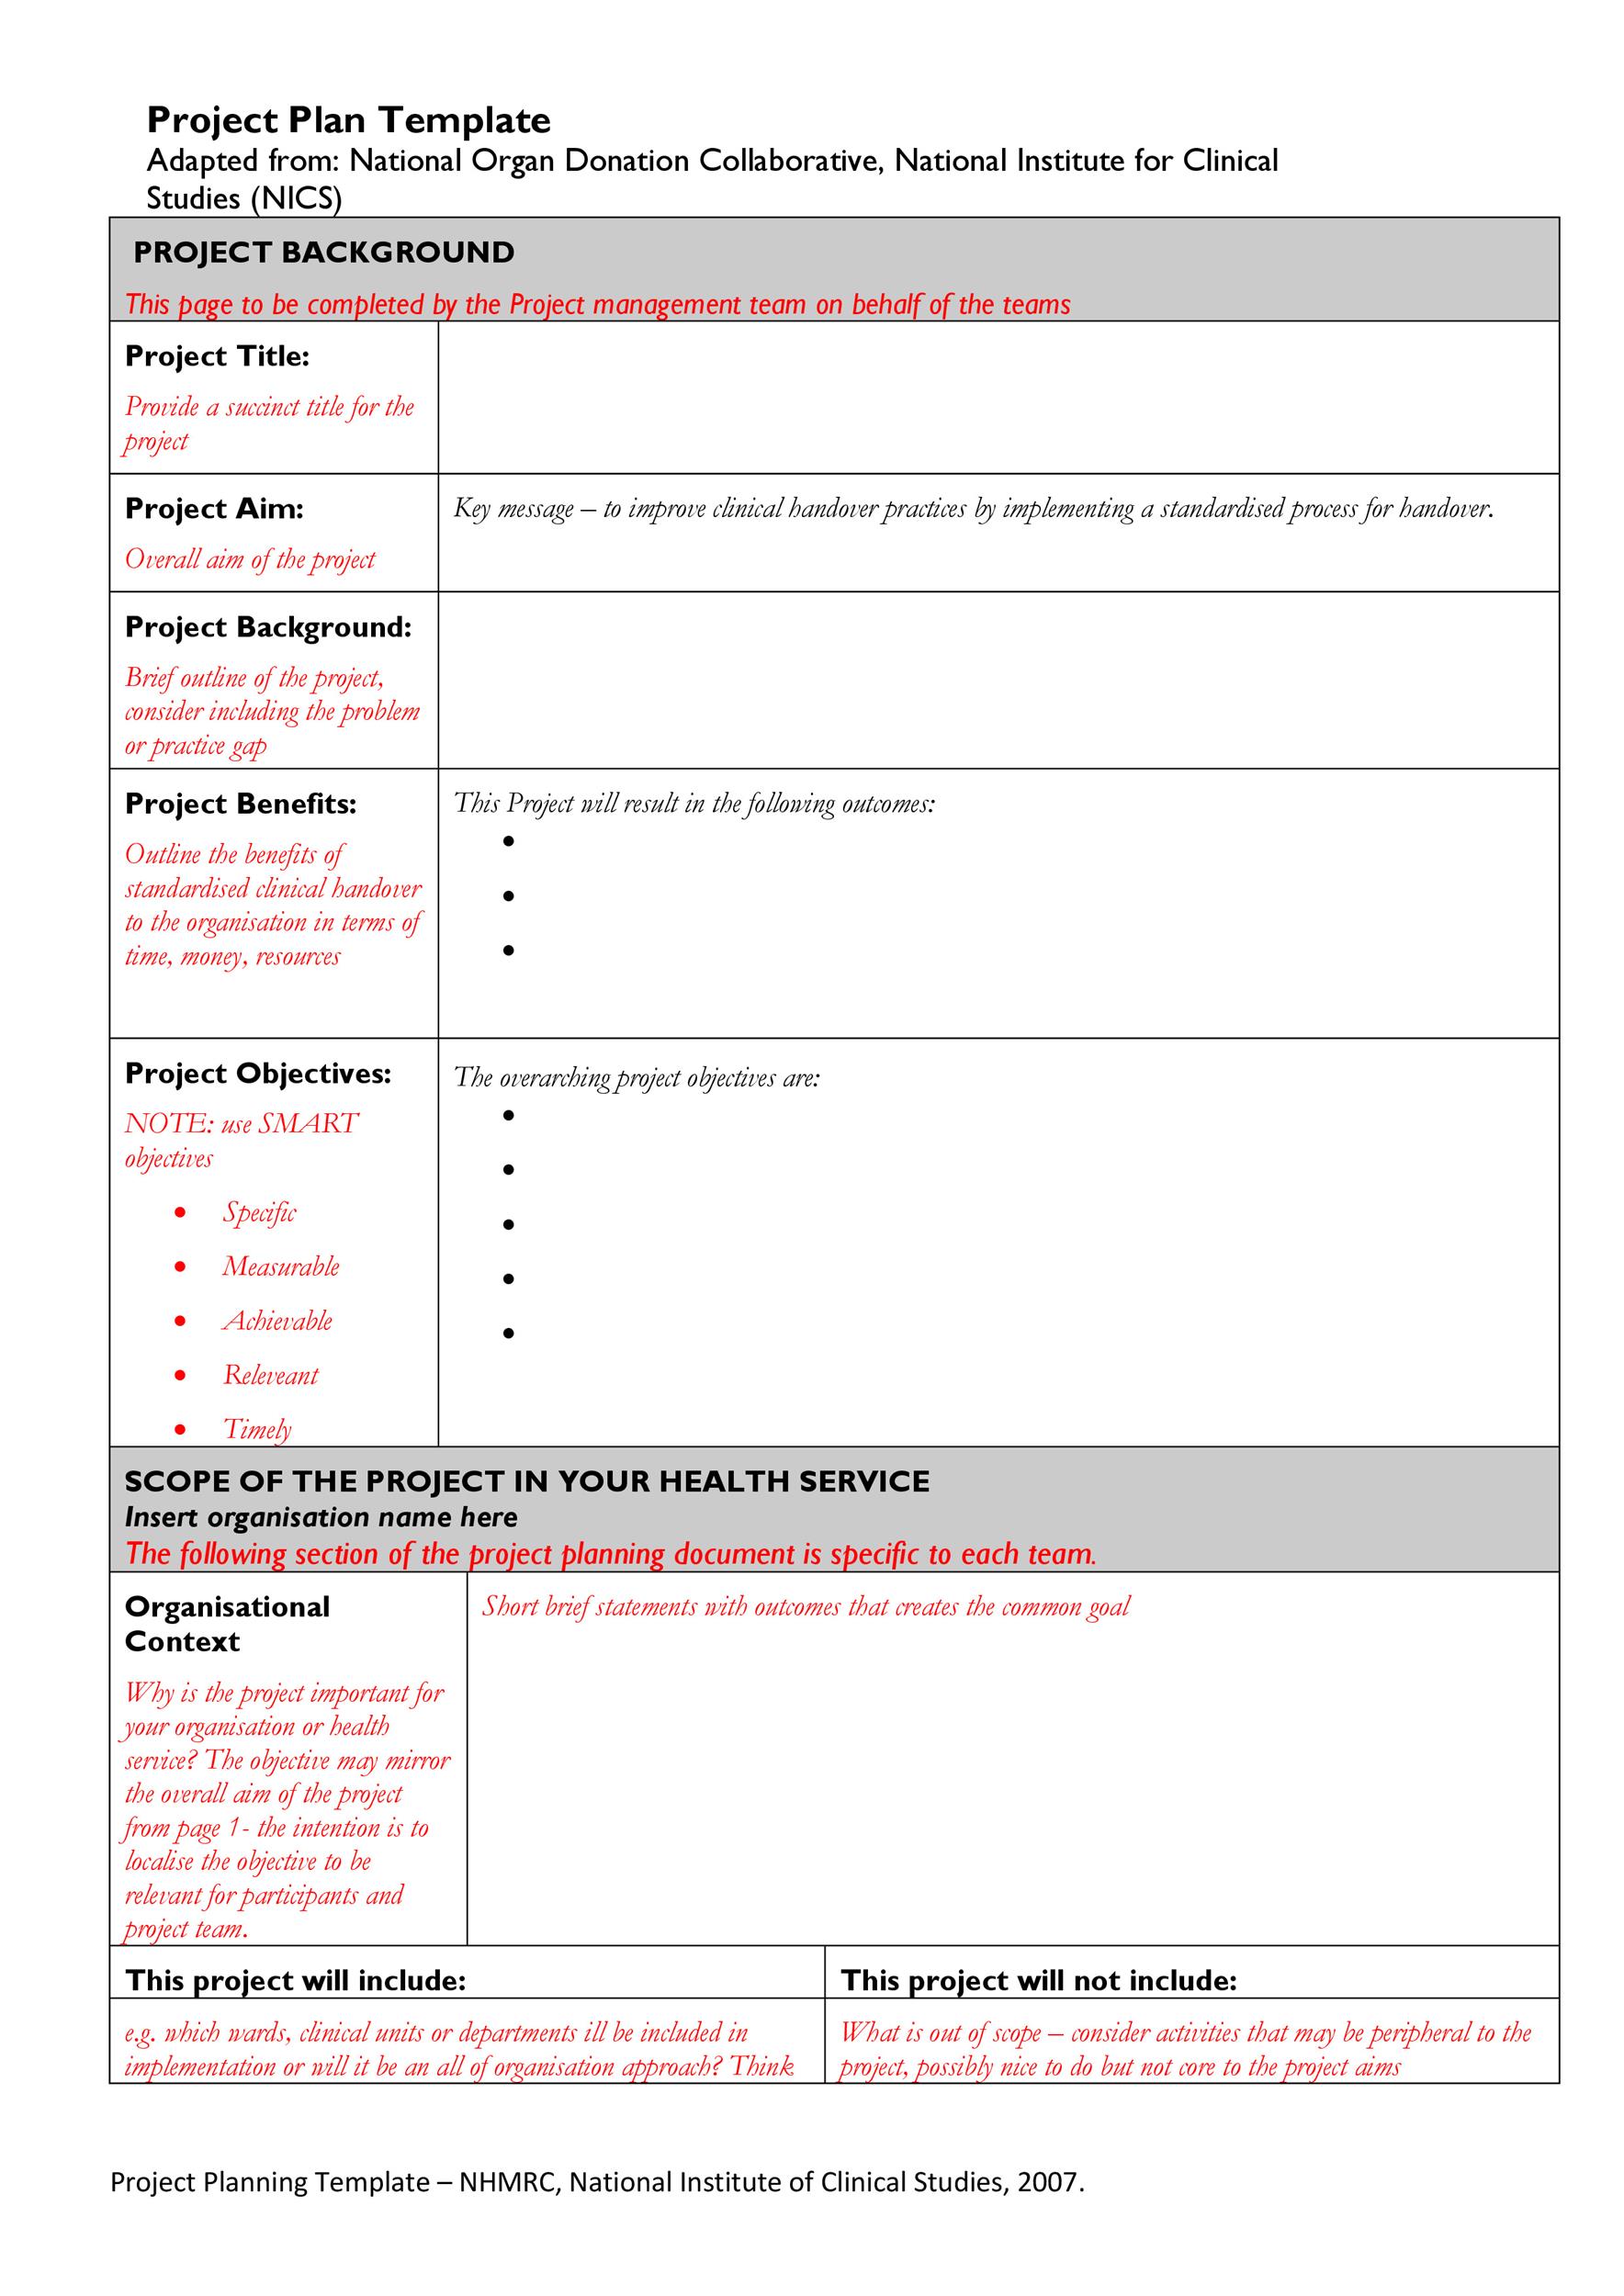 48-professional-project-plan-templates-excel-word-pdf-templatelab